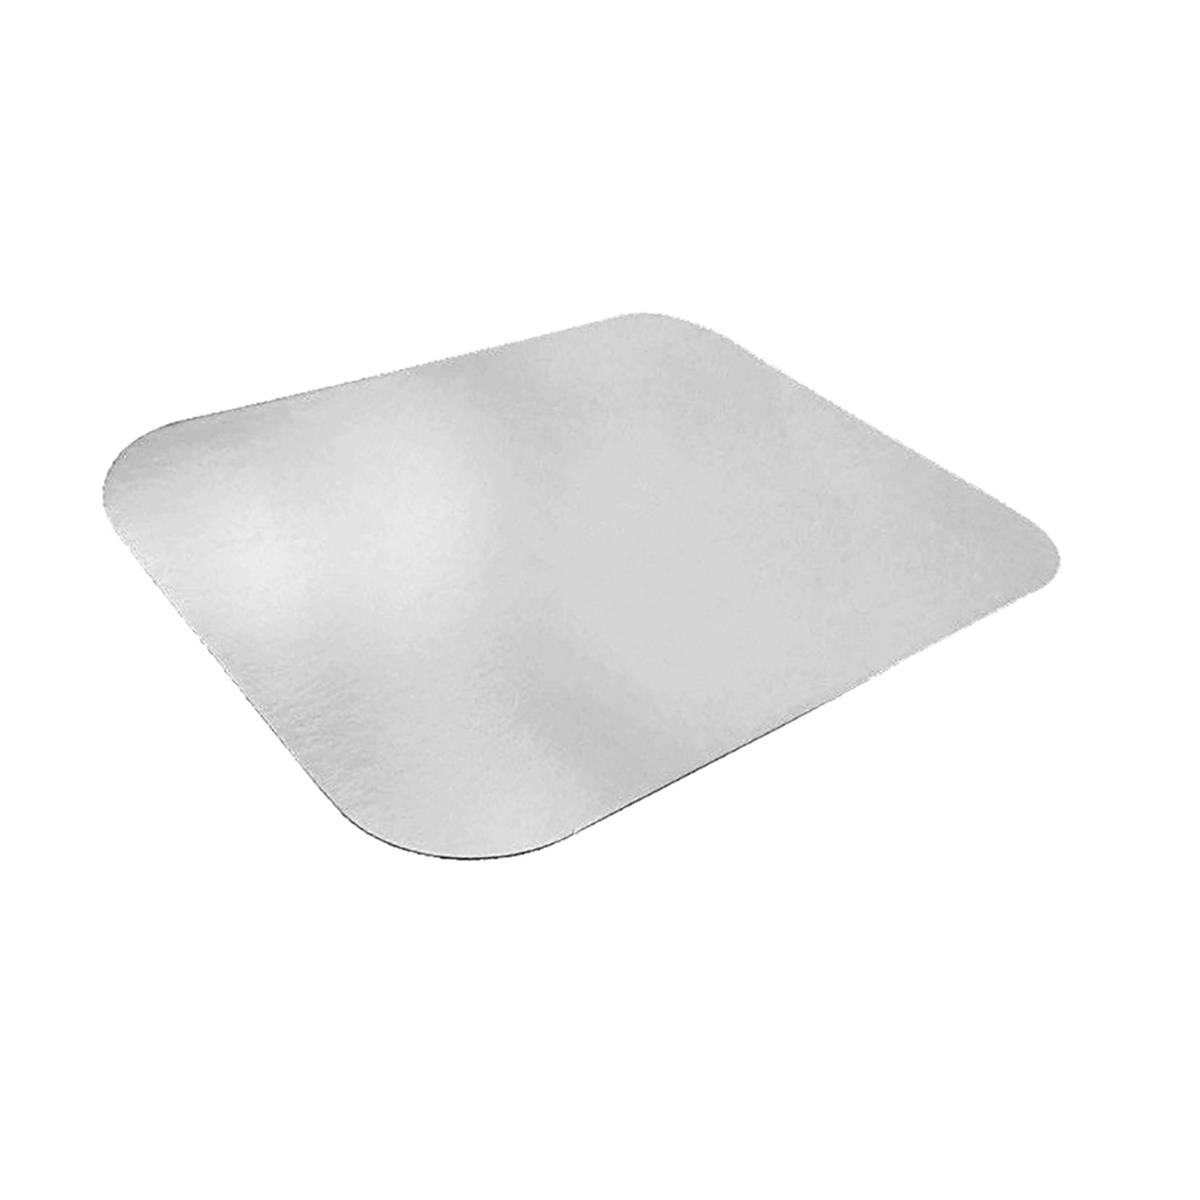 Durable L210mns Pec Board Lid For 3 Compartment Pan - Case Of 500